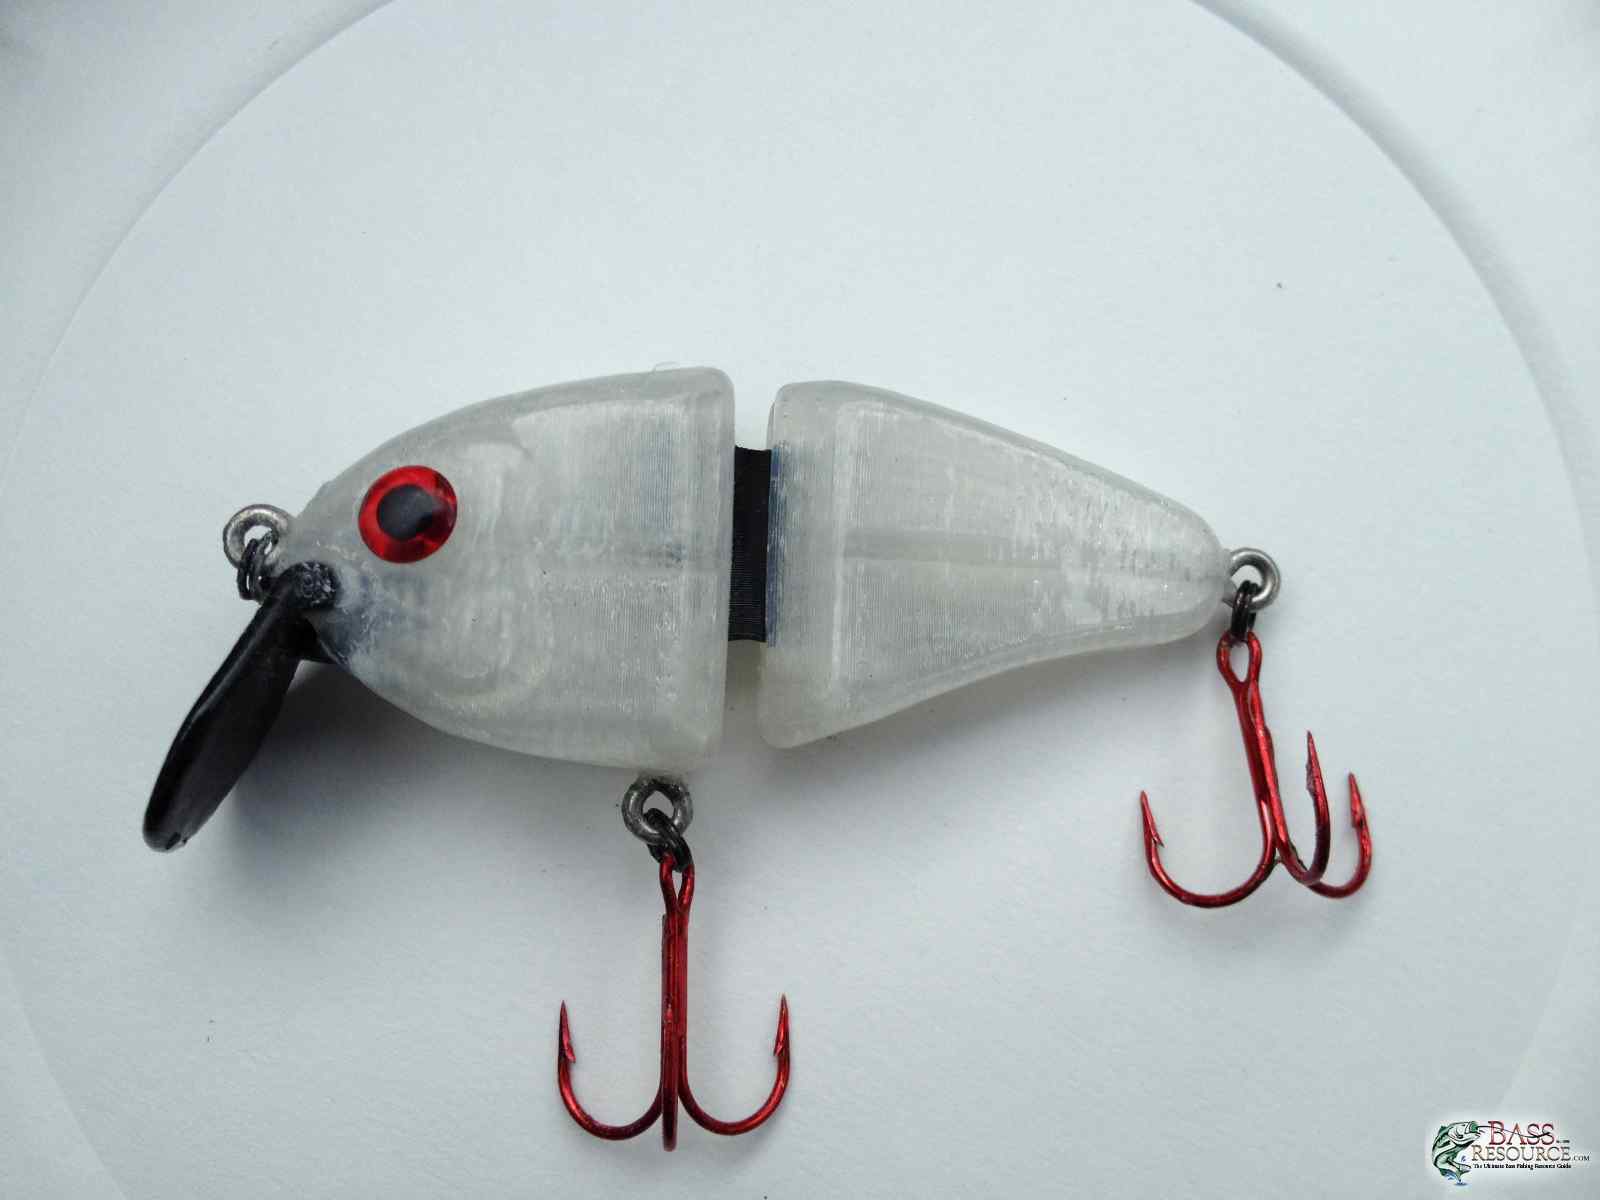 3d printed fishing lure jointed crankbait - Fishing Albums - Bass Fishing  Forums